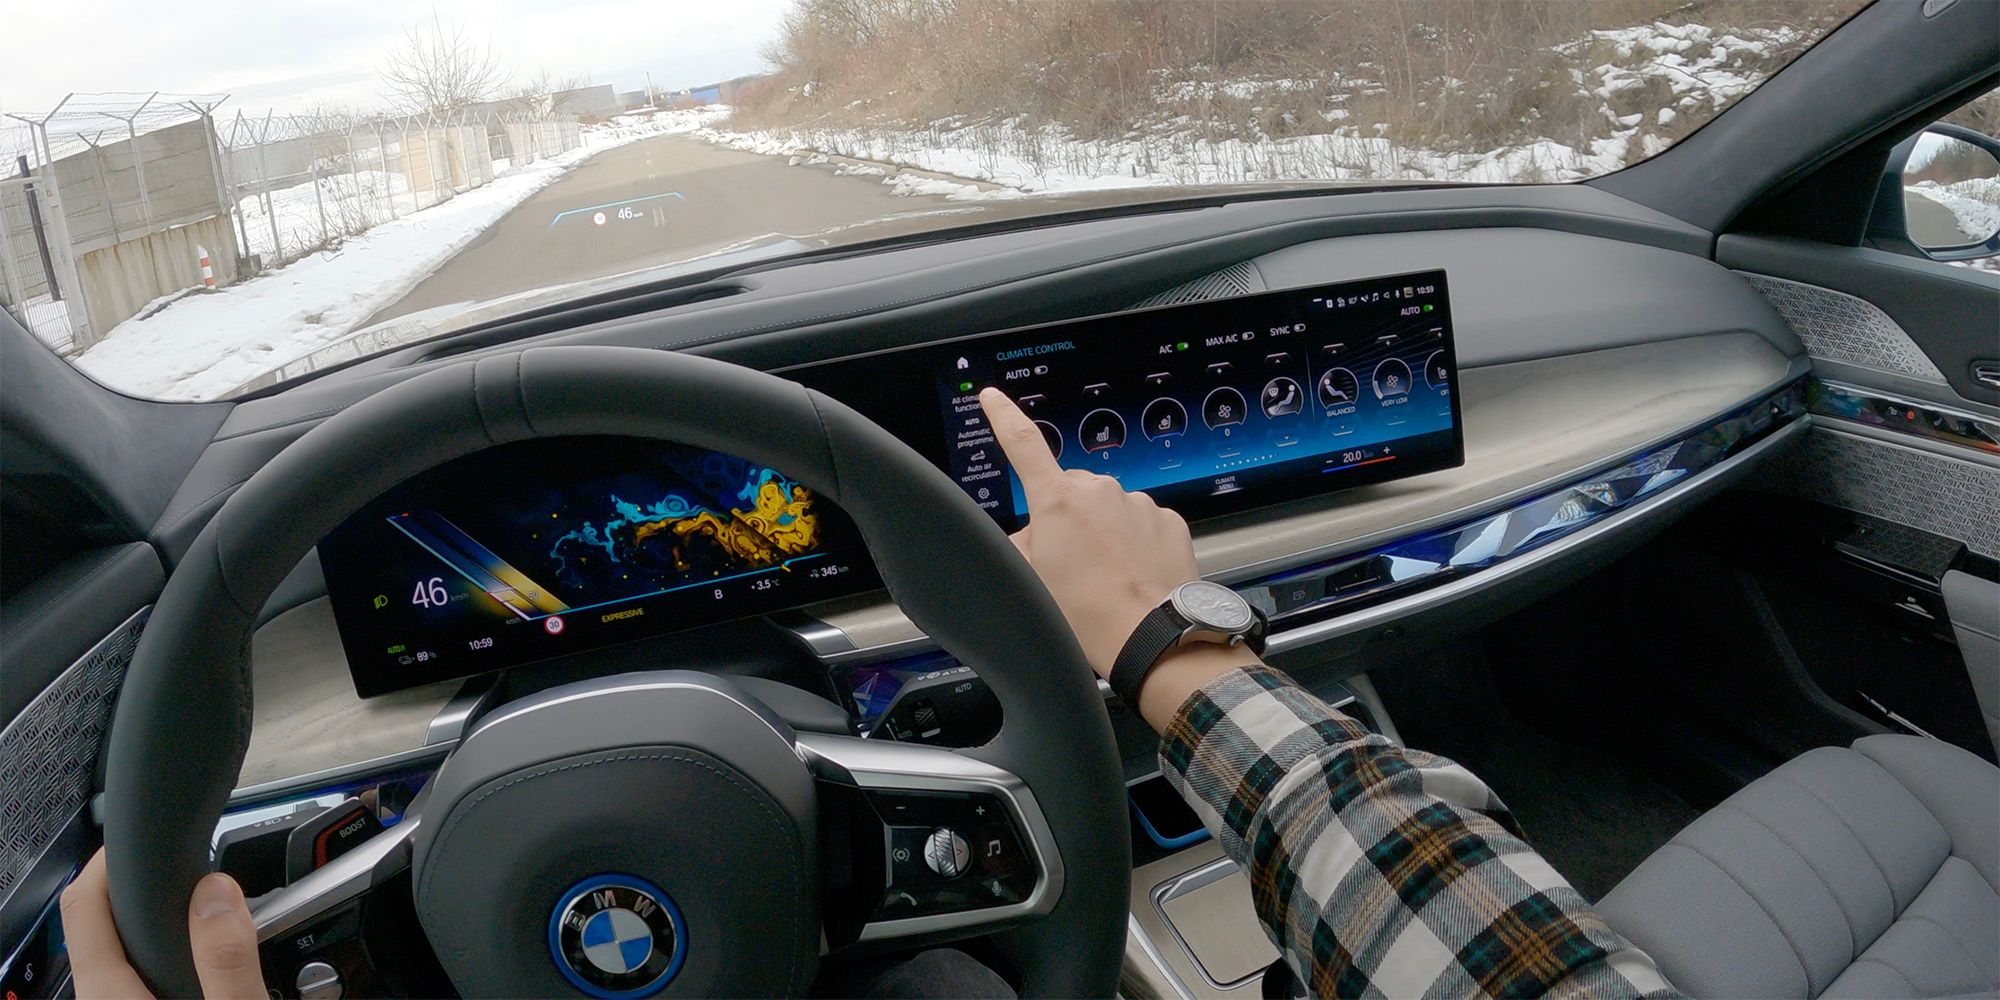 BMW i7 POV photo while driving and operating touchscreen infotainment